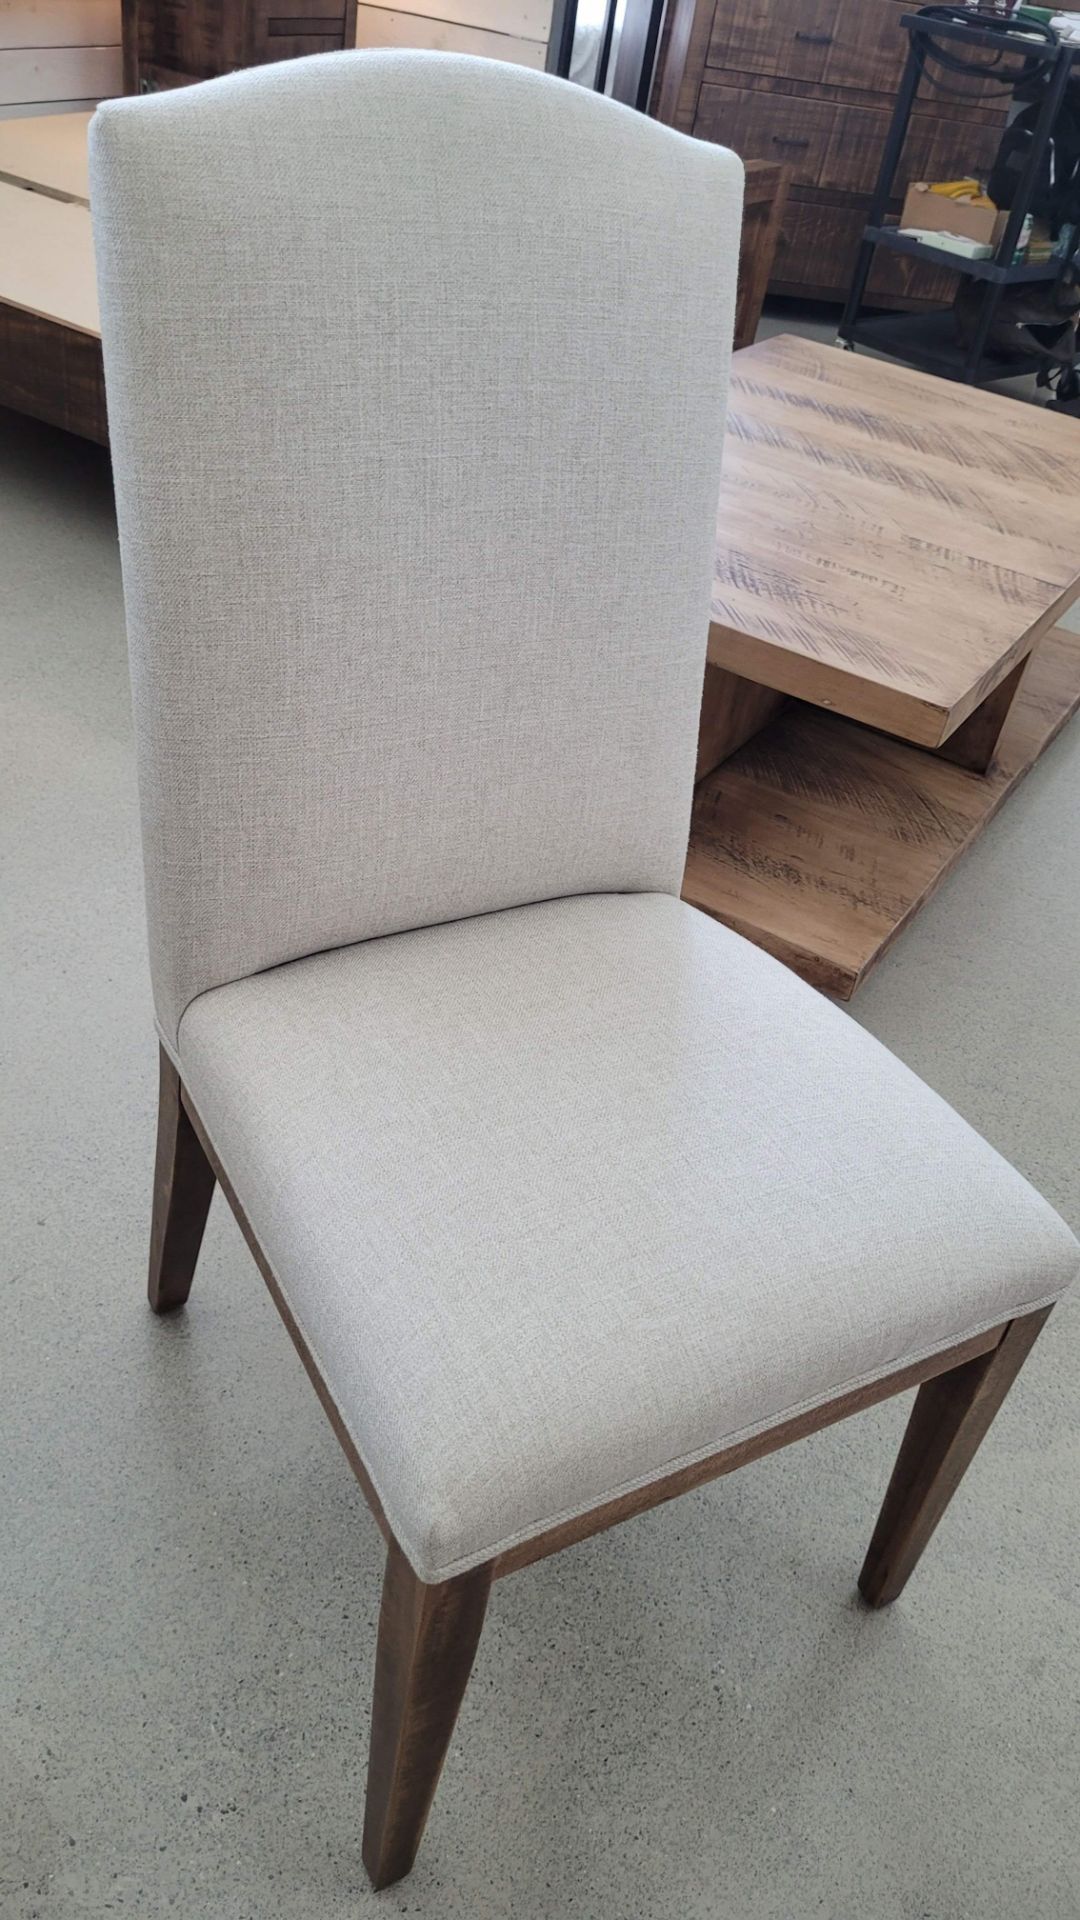 UPHOLSTERED SIDE CHAIR - Image 3 of 3